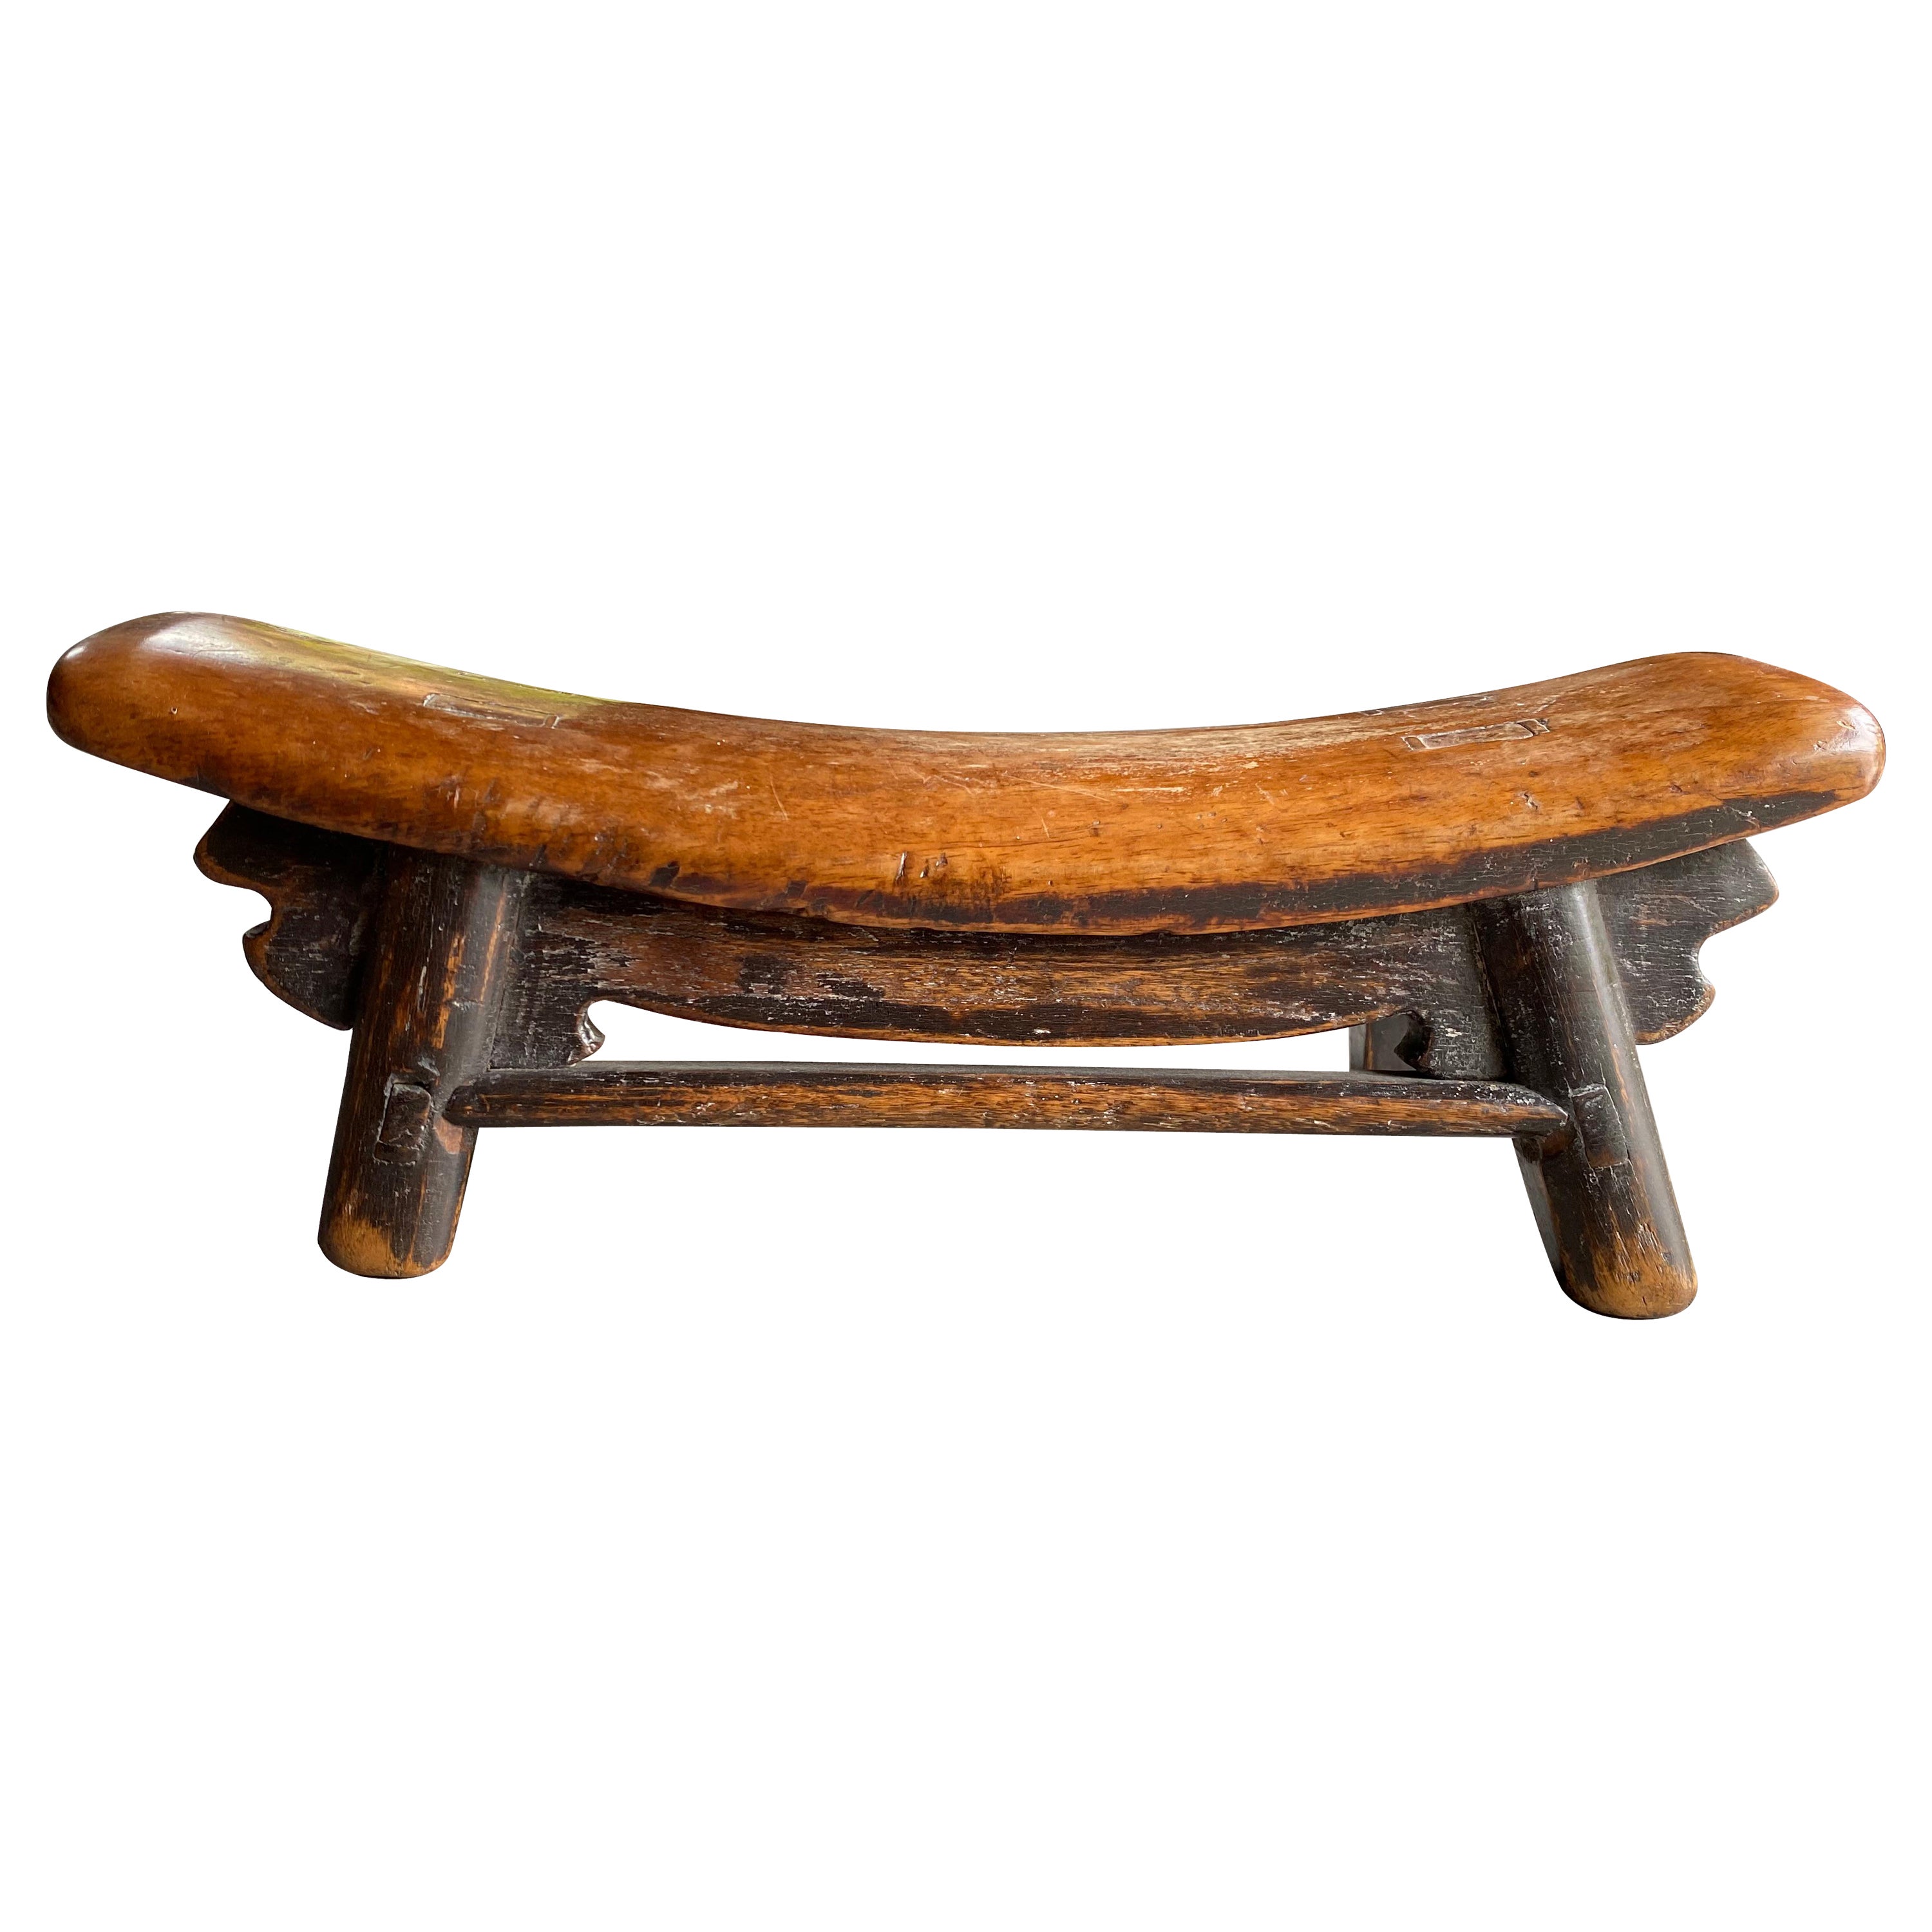 Chinese Wooden Opium Headrest from Early 20th Century